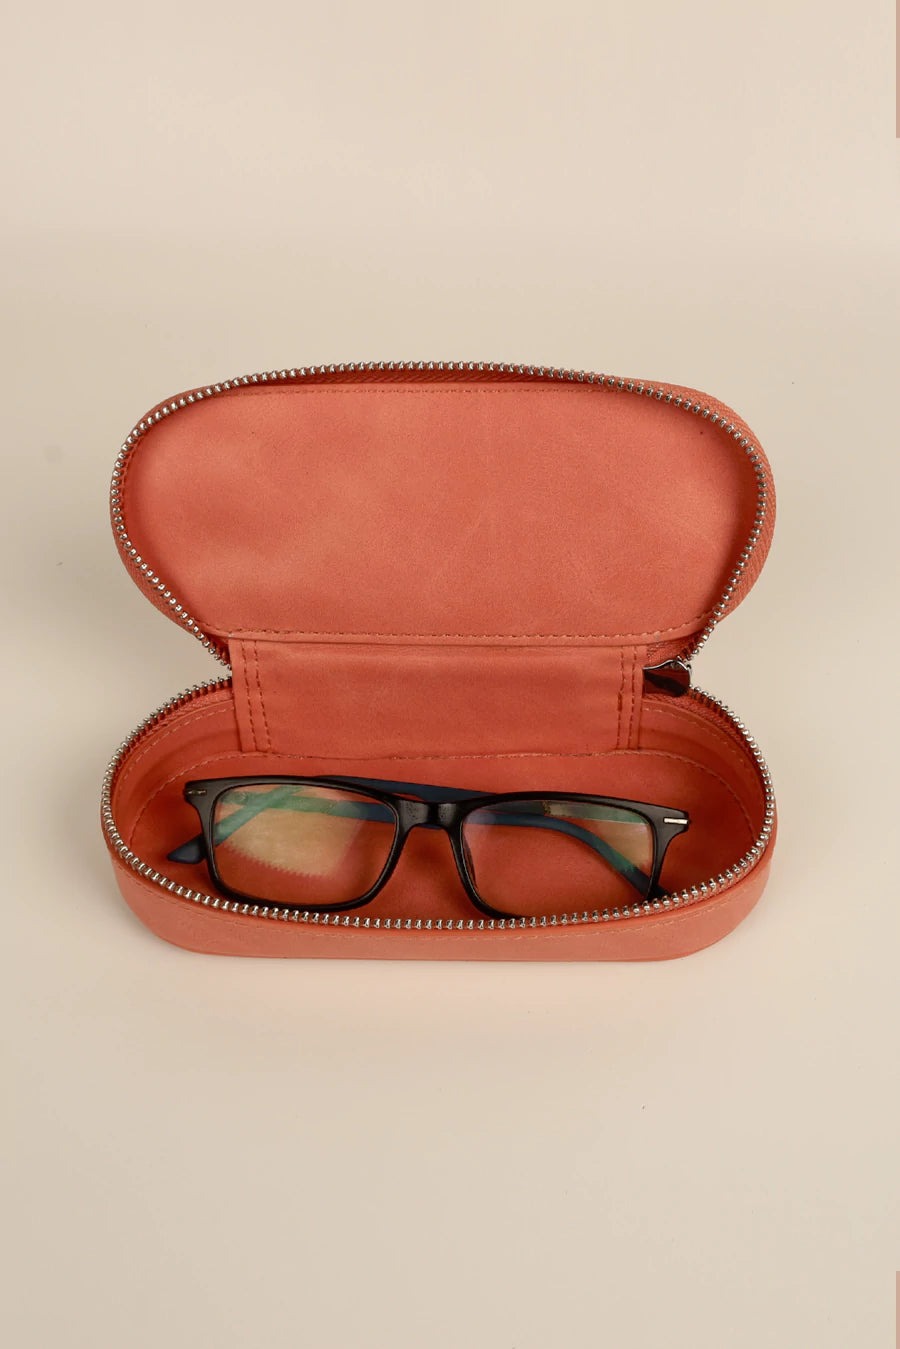 Vegan Leather Eyewear Case or Sunglass Cover Coral Open